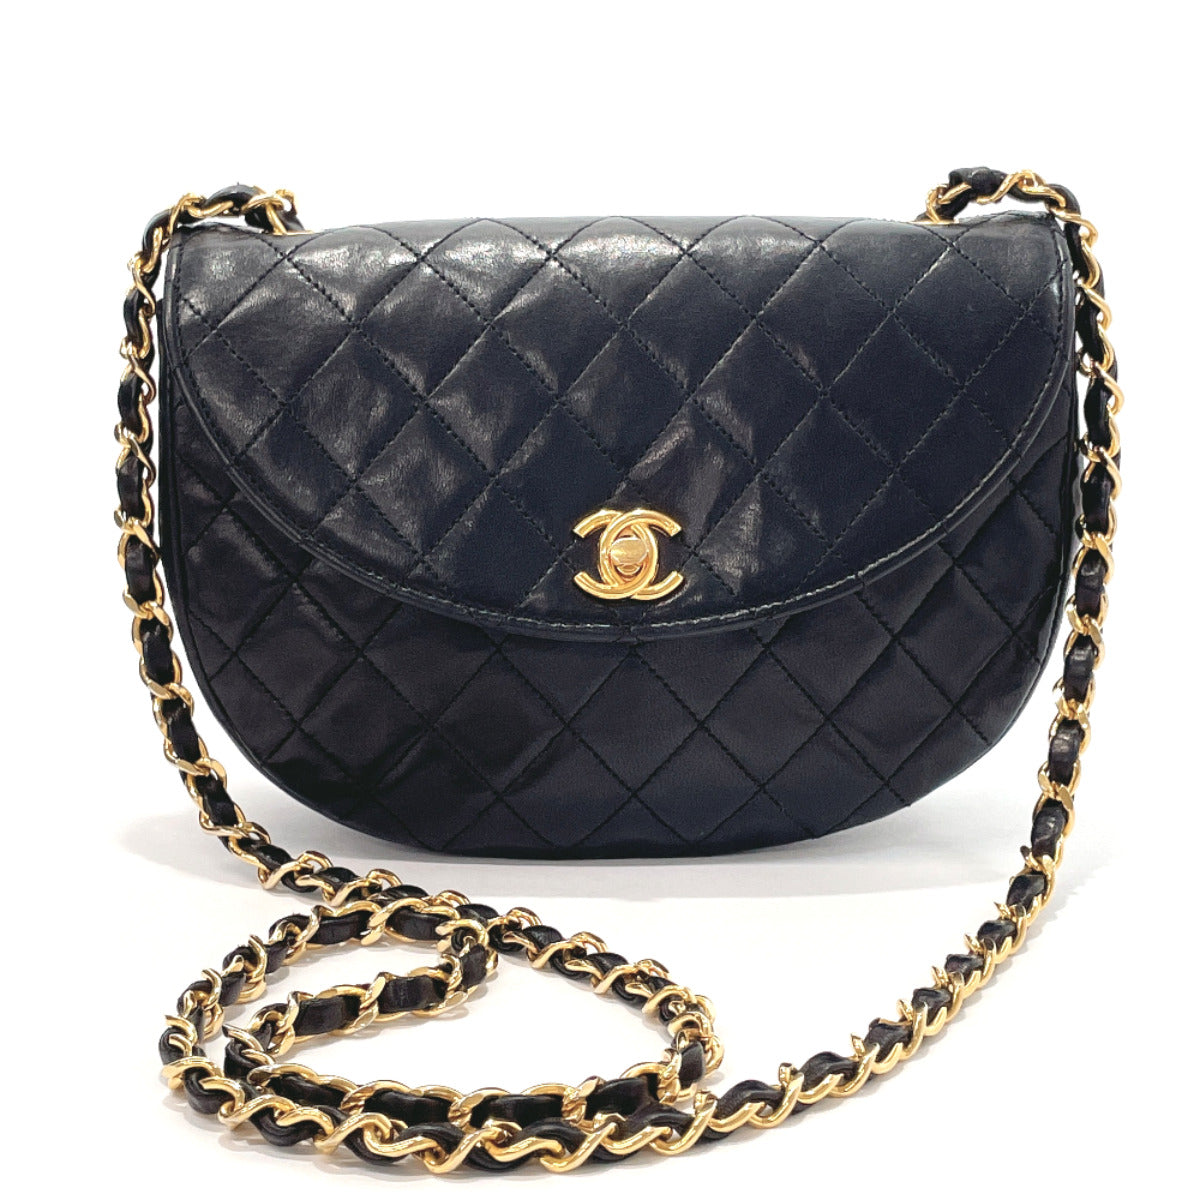 Chanel 125 Chanel Black Cotton Quilted Leather 2.55 10 Shoulder